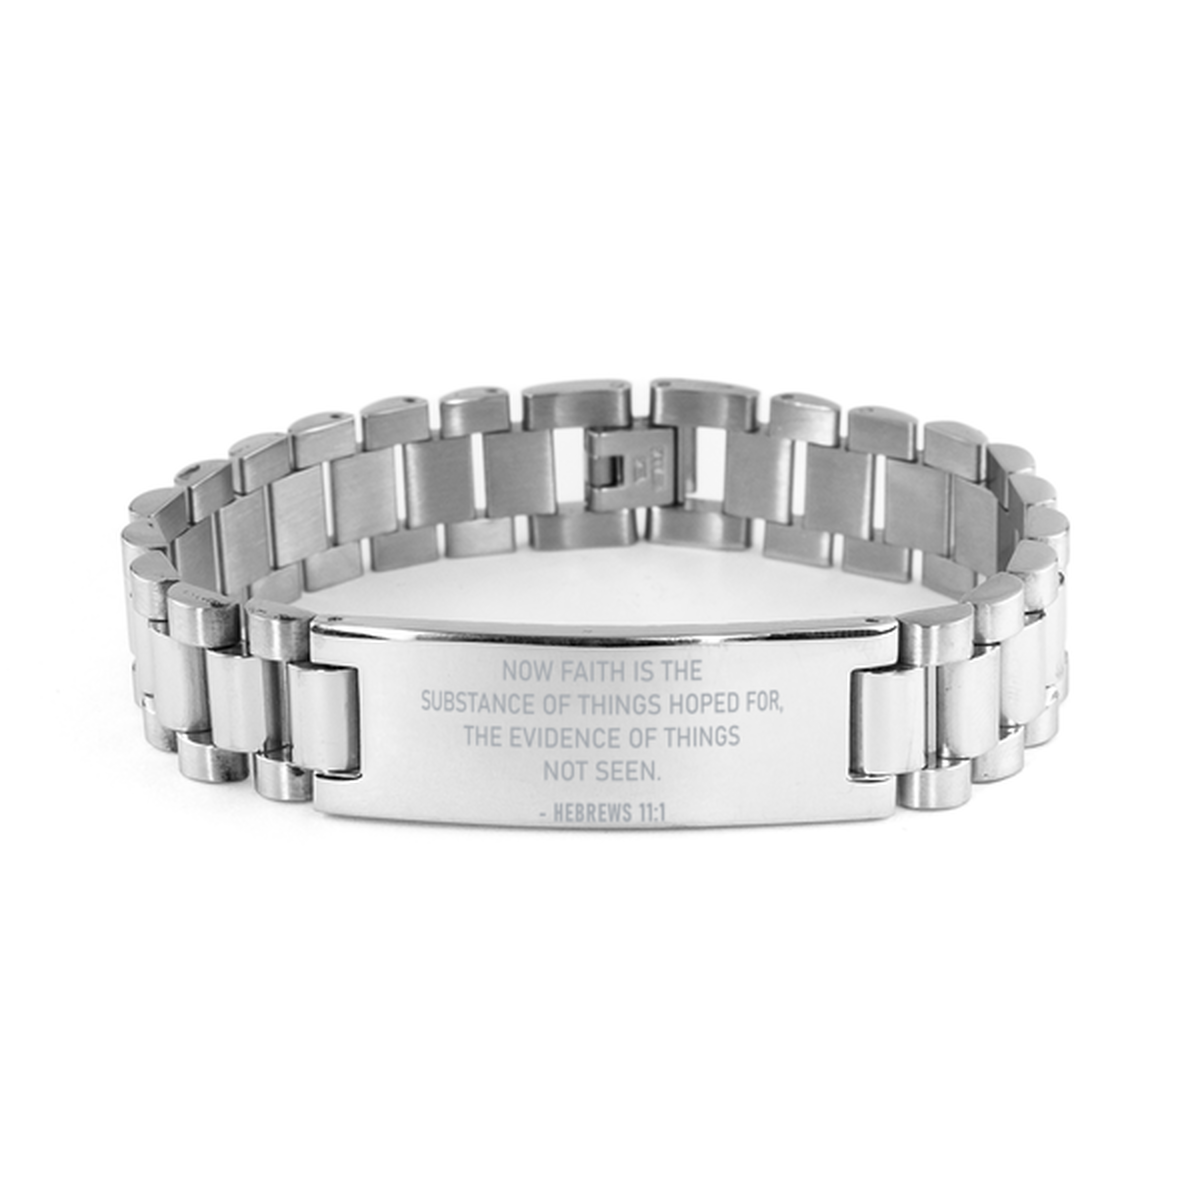 Christian Ladder Stainless Steel Bracelet, Hebrews 11:1 Now Faith Is The Substance Of Things Hoped For, Motivational Bible Verse Gifts For Men Women